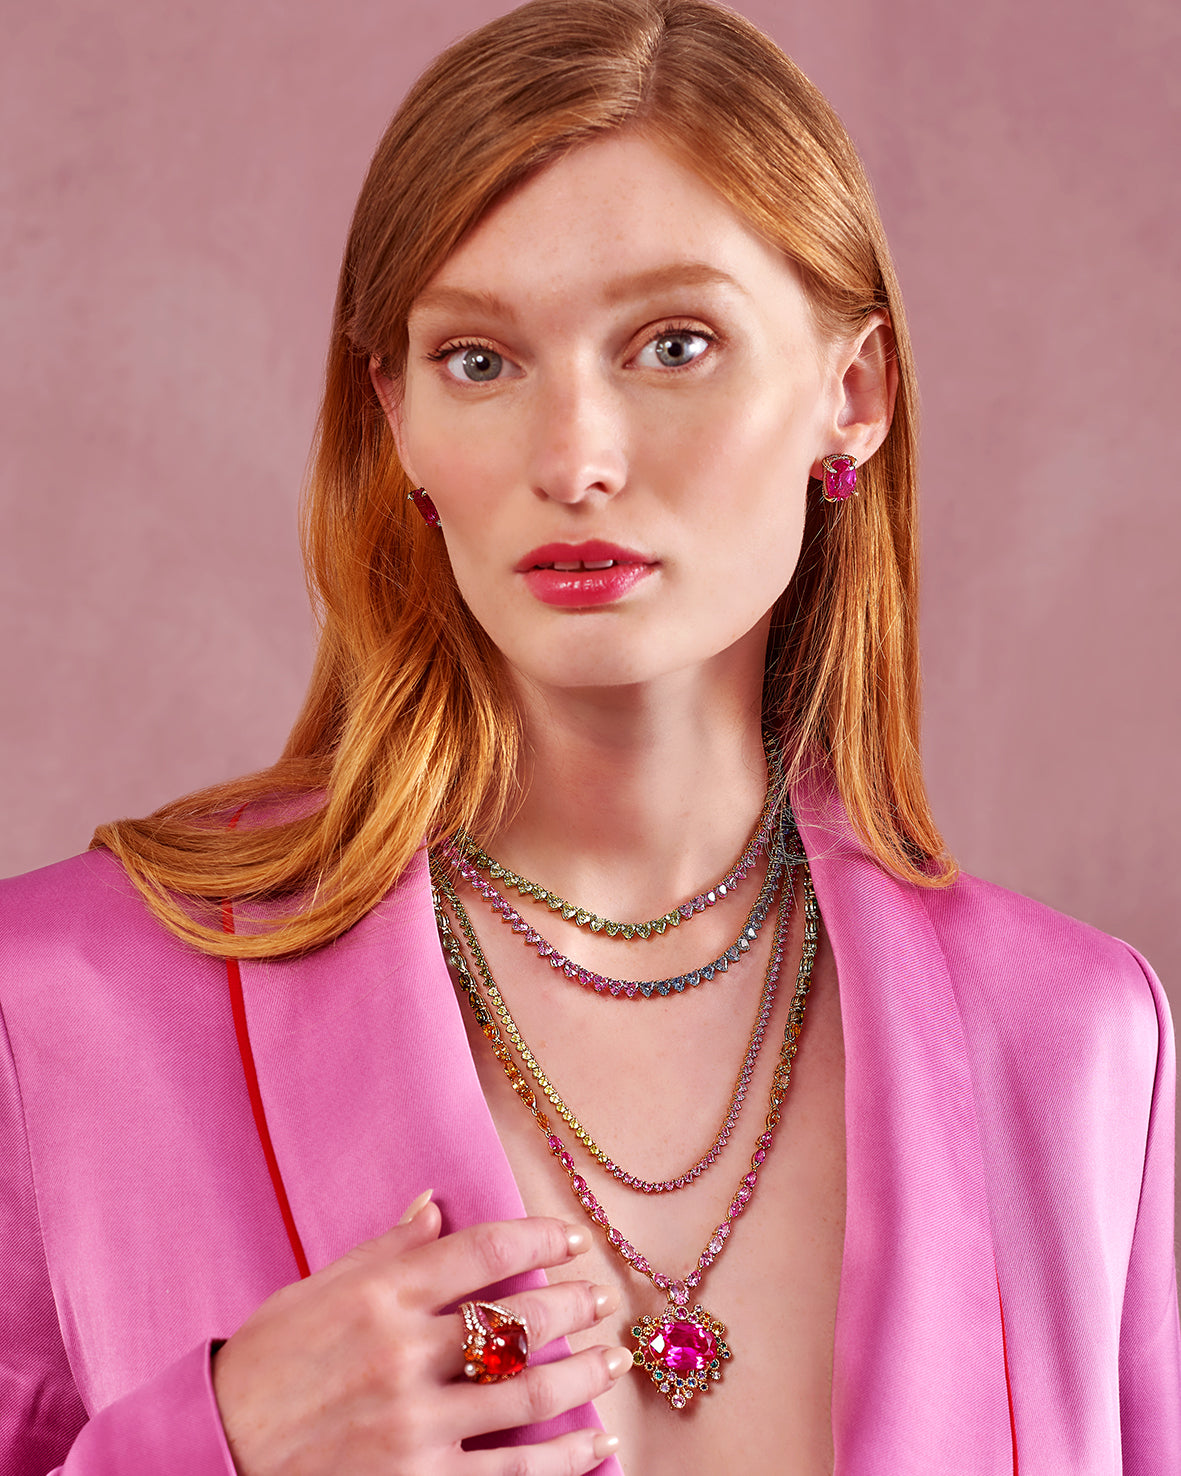 Anabela Chan Joaillerie_Model Campaign Shot_Rainbow Spectra Pendant Necklace, Magenta Eternity Heart Necklace, Petite Eternity Heart Necklace, Peony Eternity Heart Necklace, Goldenberry Sugarloaf Ring, Fuchsia Cushion Wing Studs